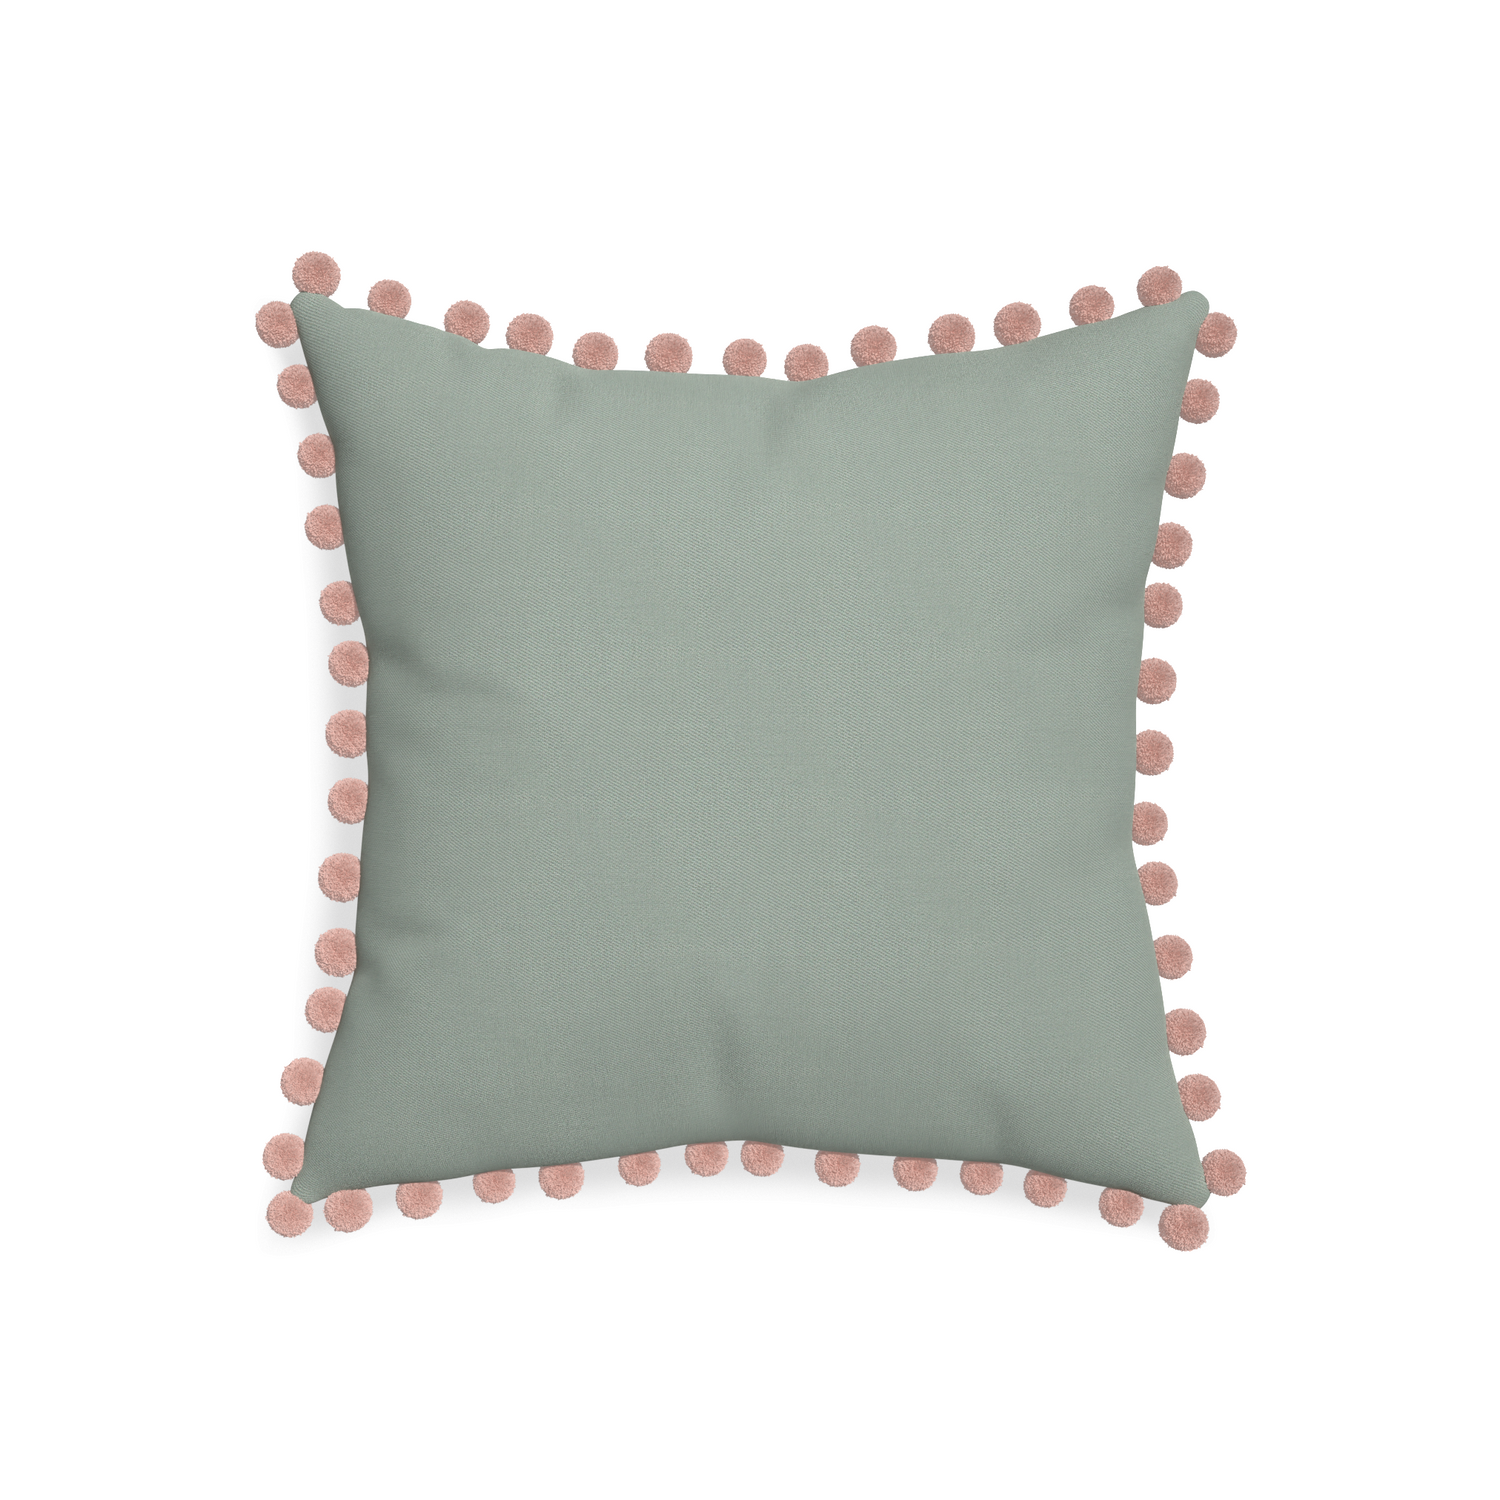 20-square sage custom sage green cottonpillow with rose pom pom on white background